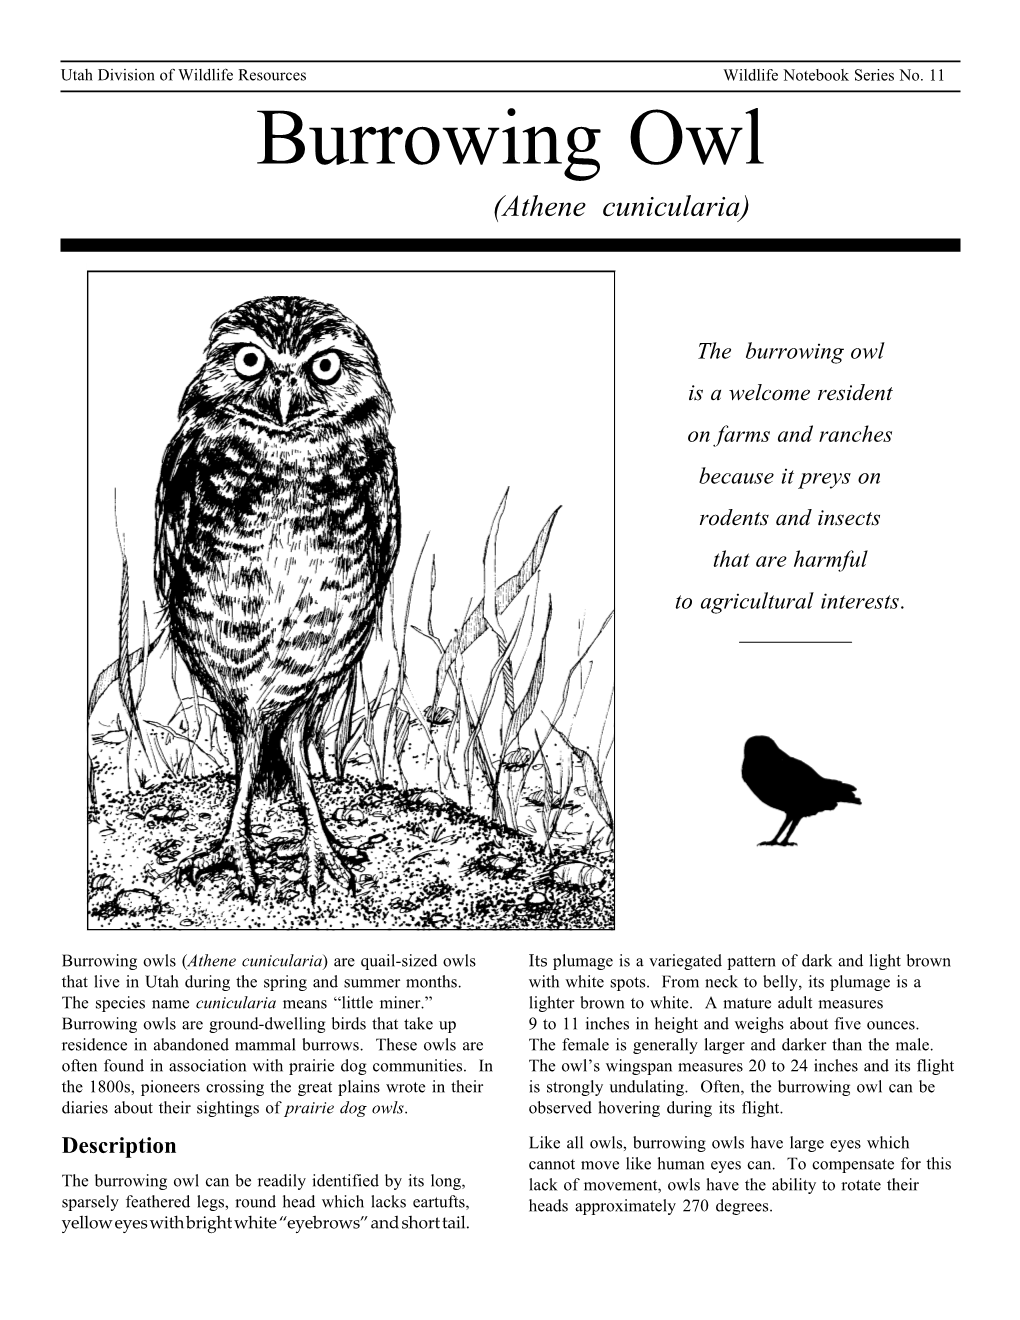 Burrowing Owls Biology and Ecology from Utah DWR (PDF)